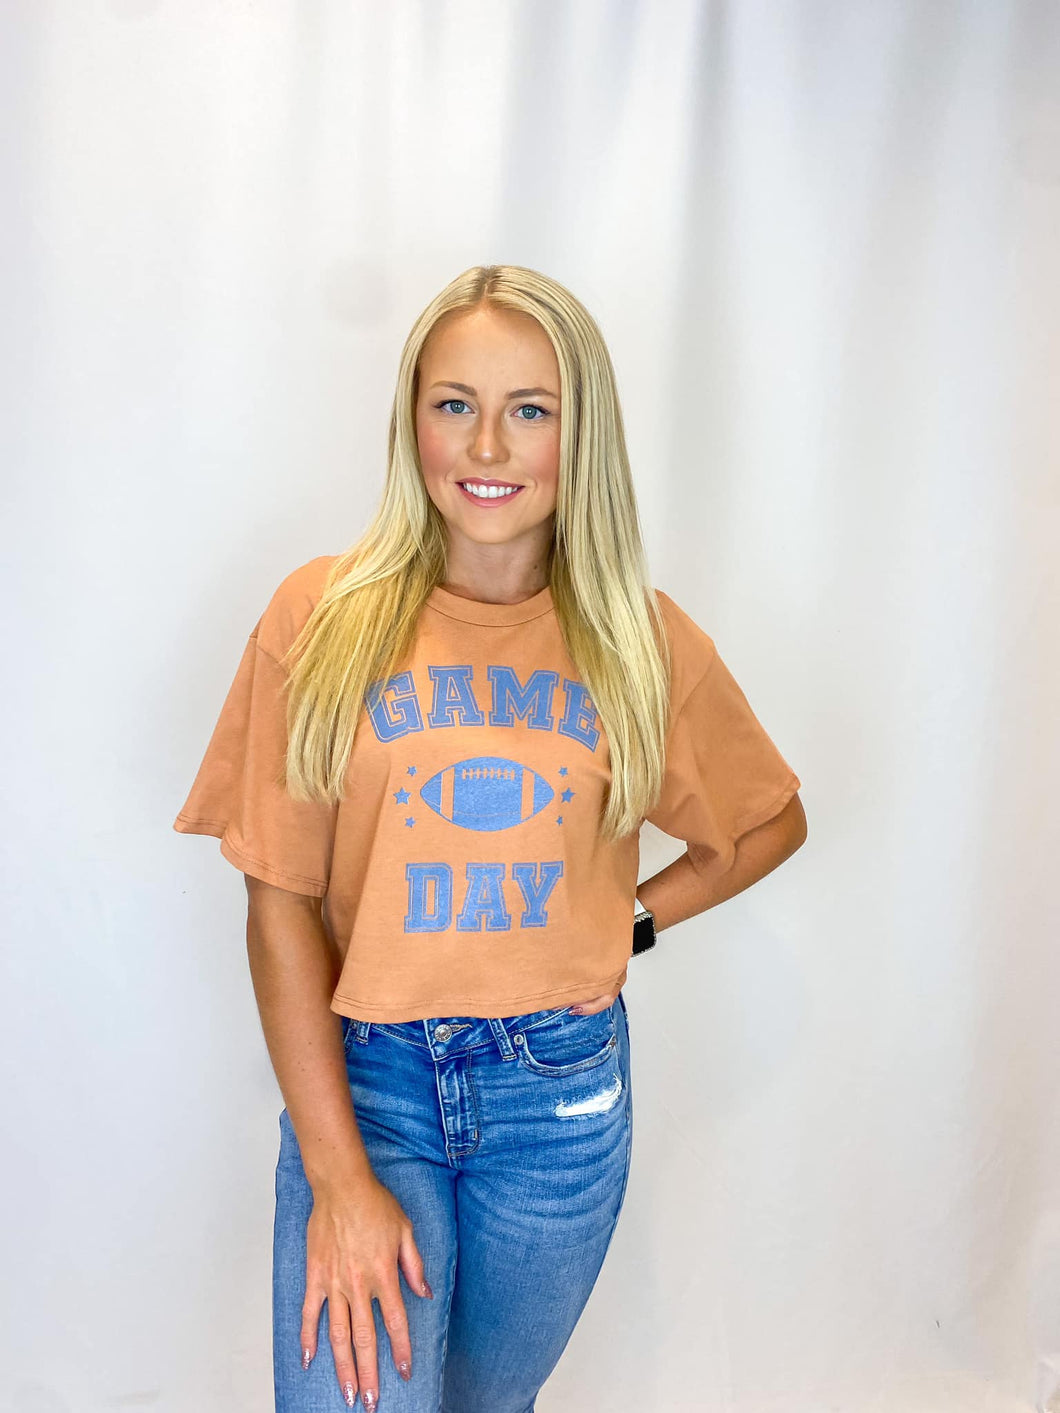 Game Day Cropped Tee